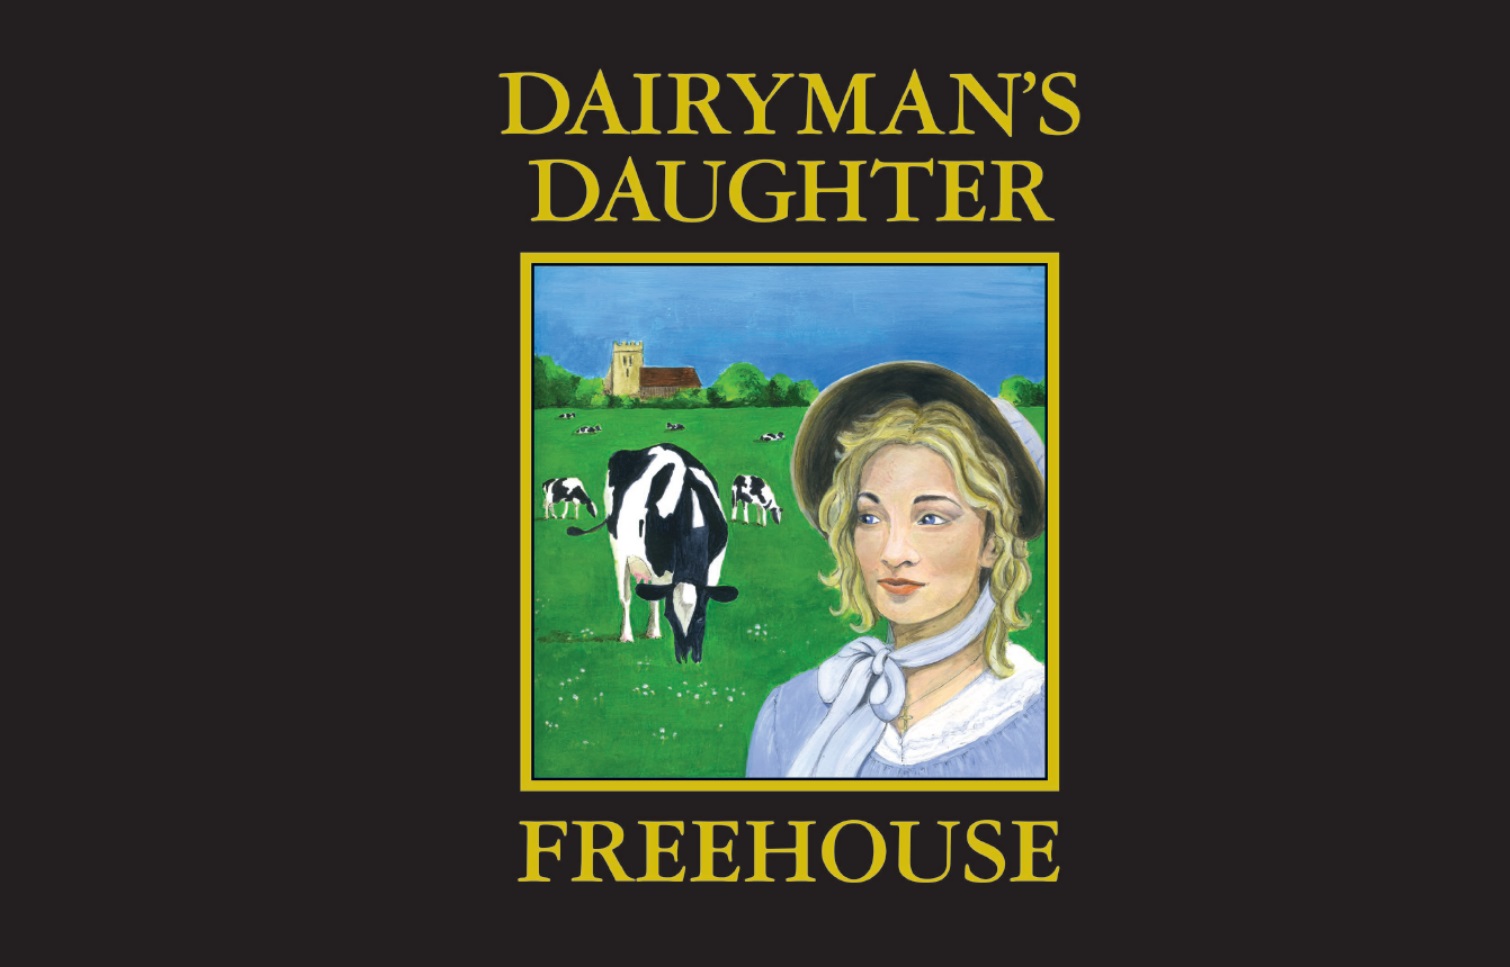 The Dairyman’s Daughter